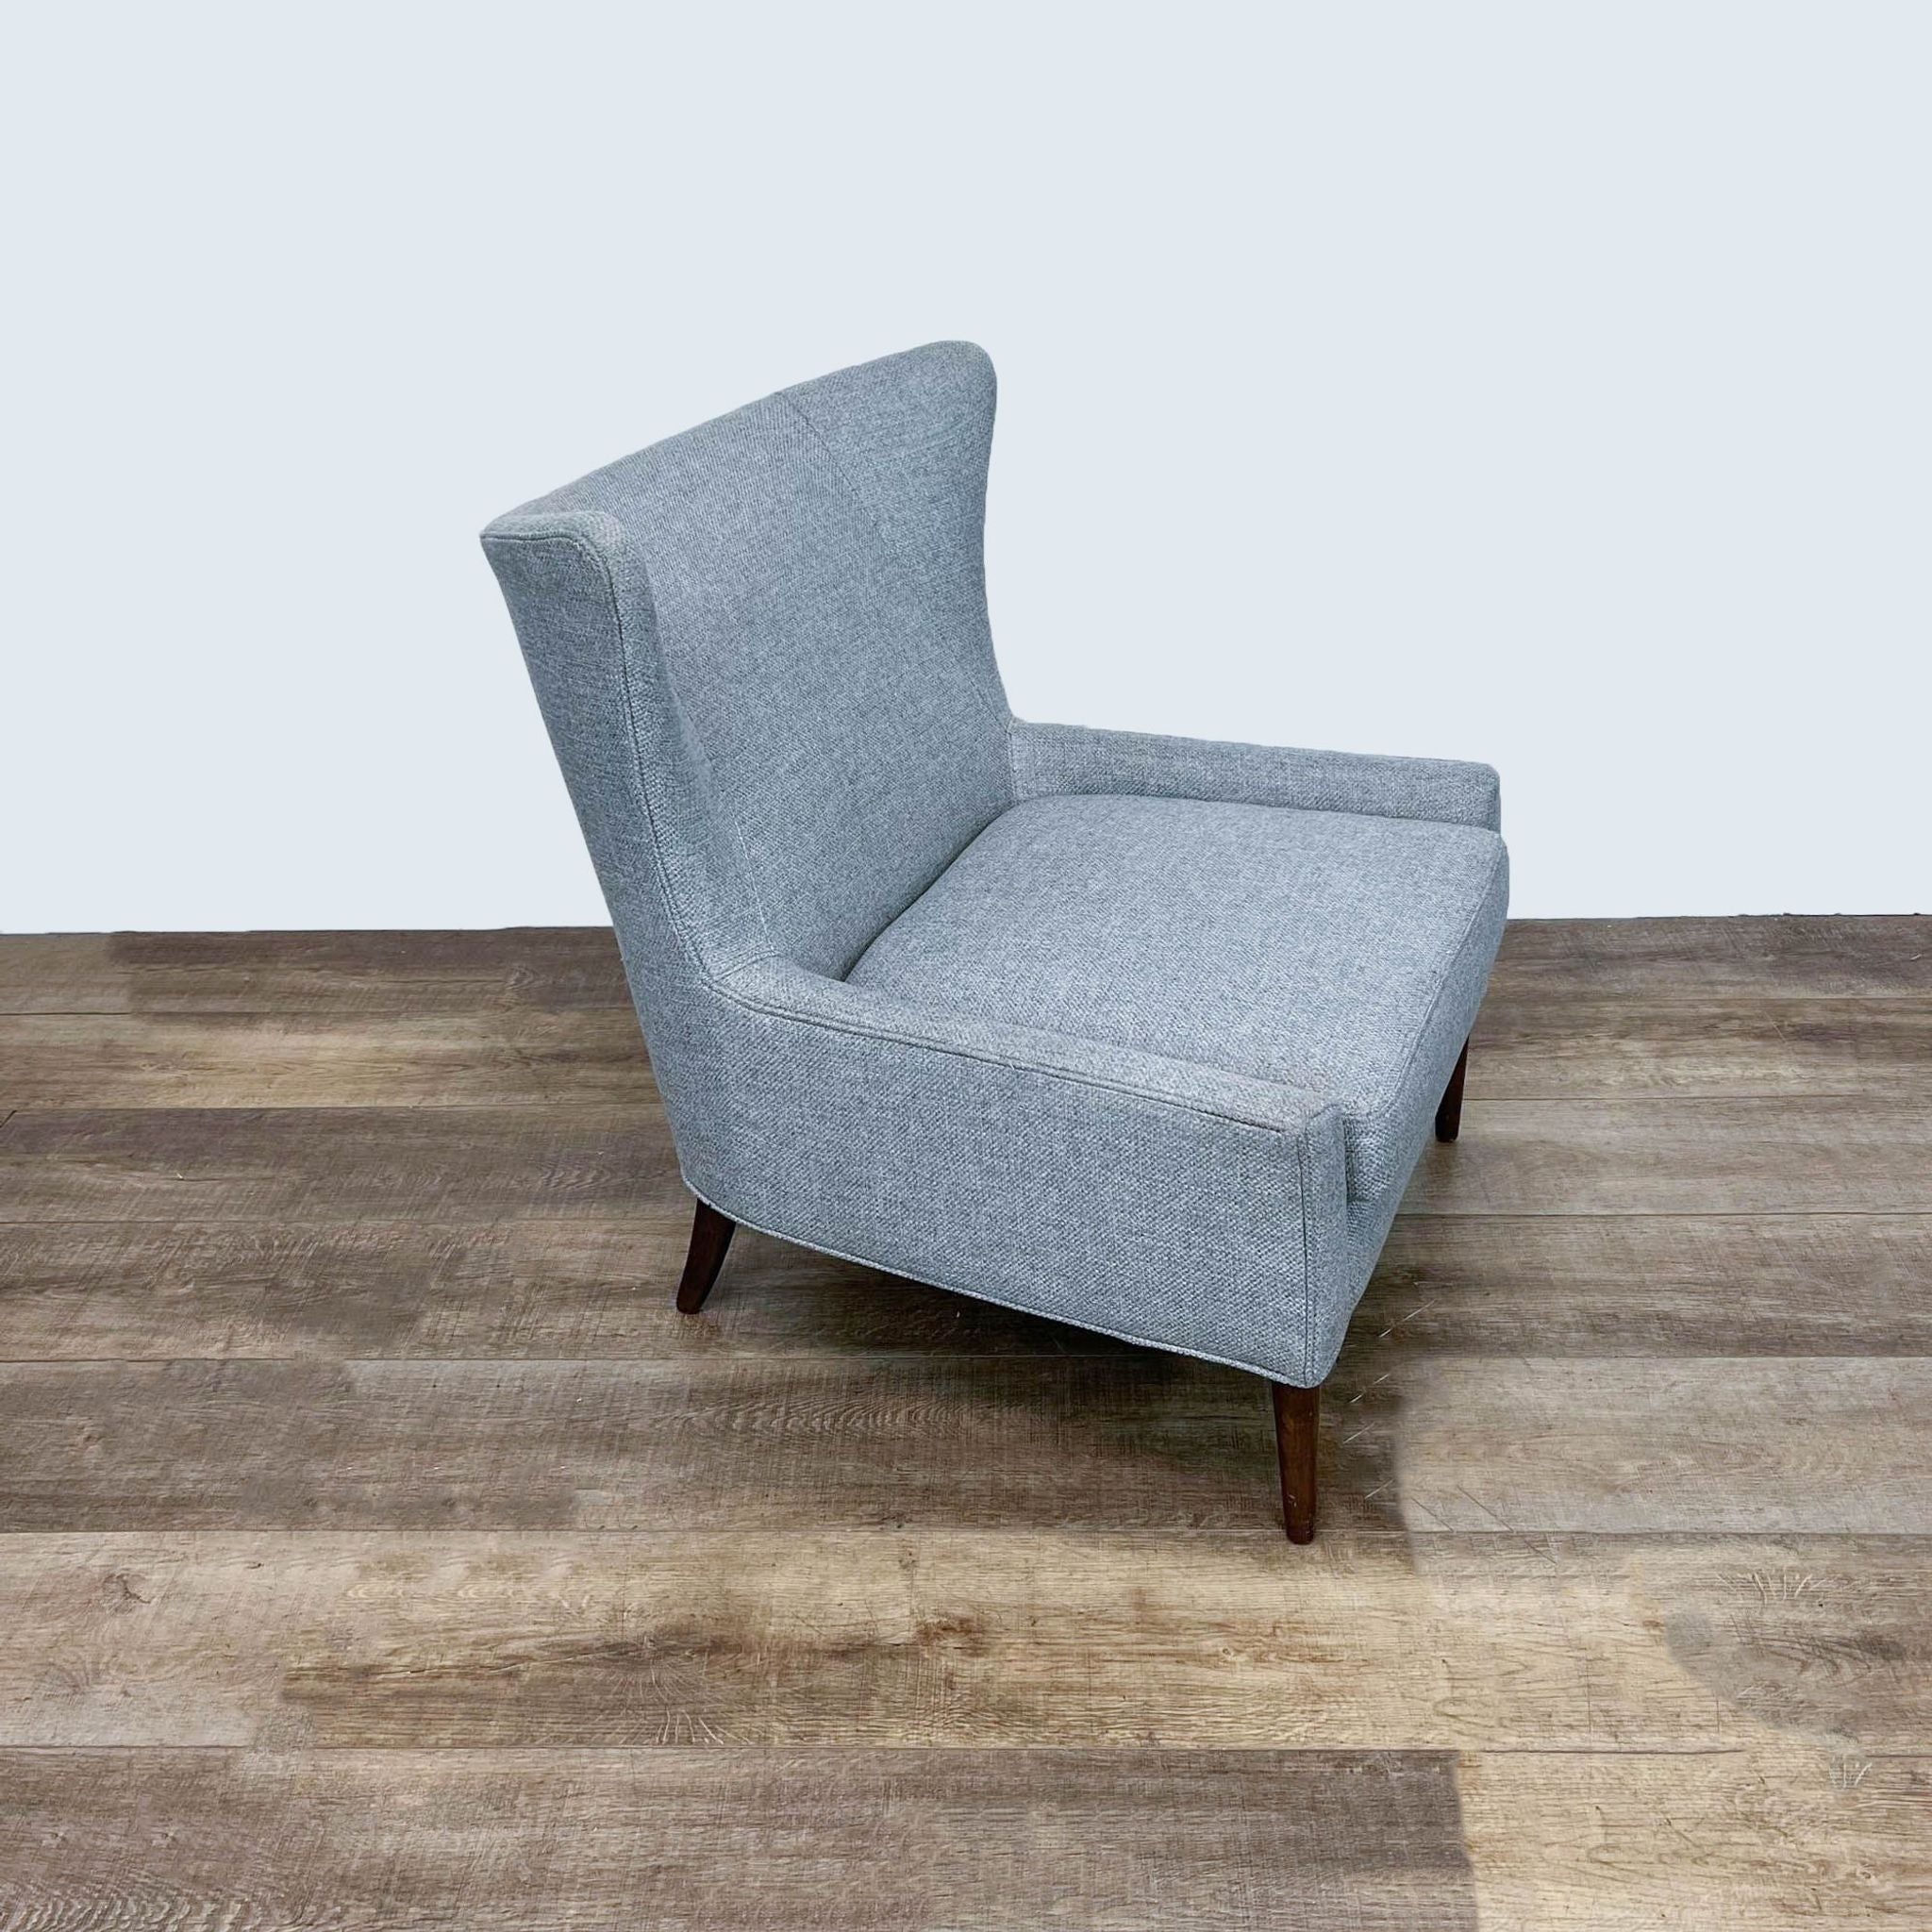 Side and rear angles of Four Hands' Marlow chair, displaying the elegant wingback style, gray upholstery, and dark wood legs.